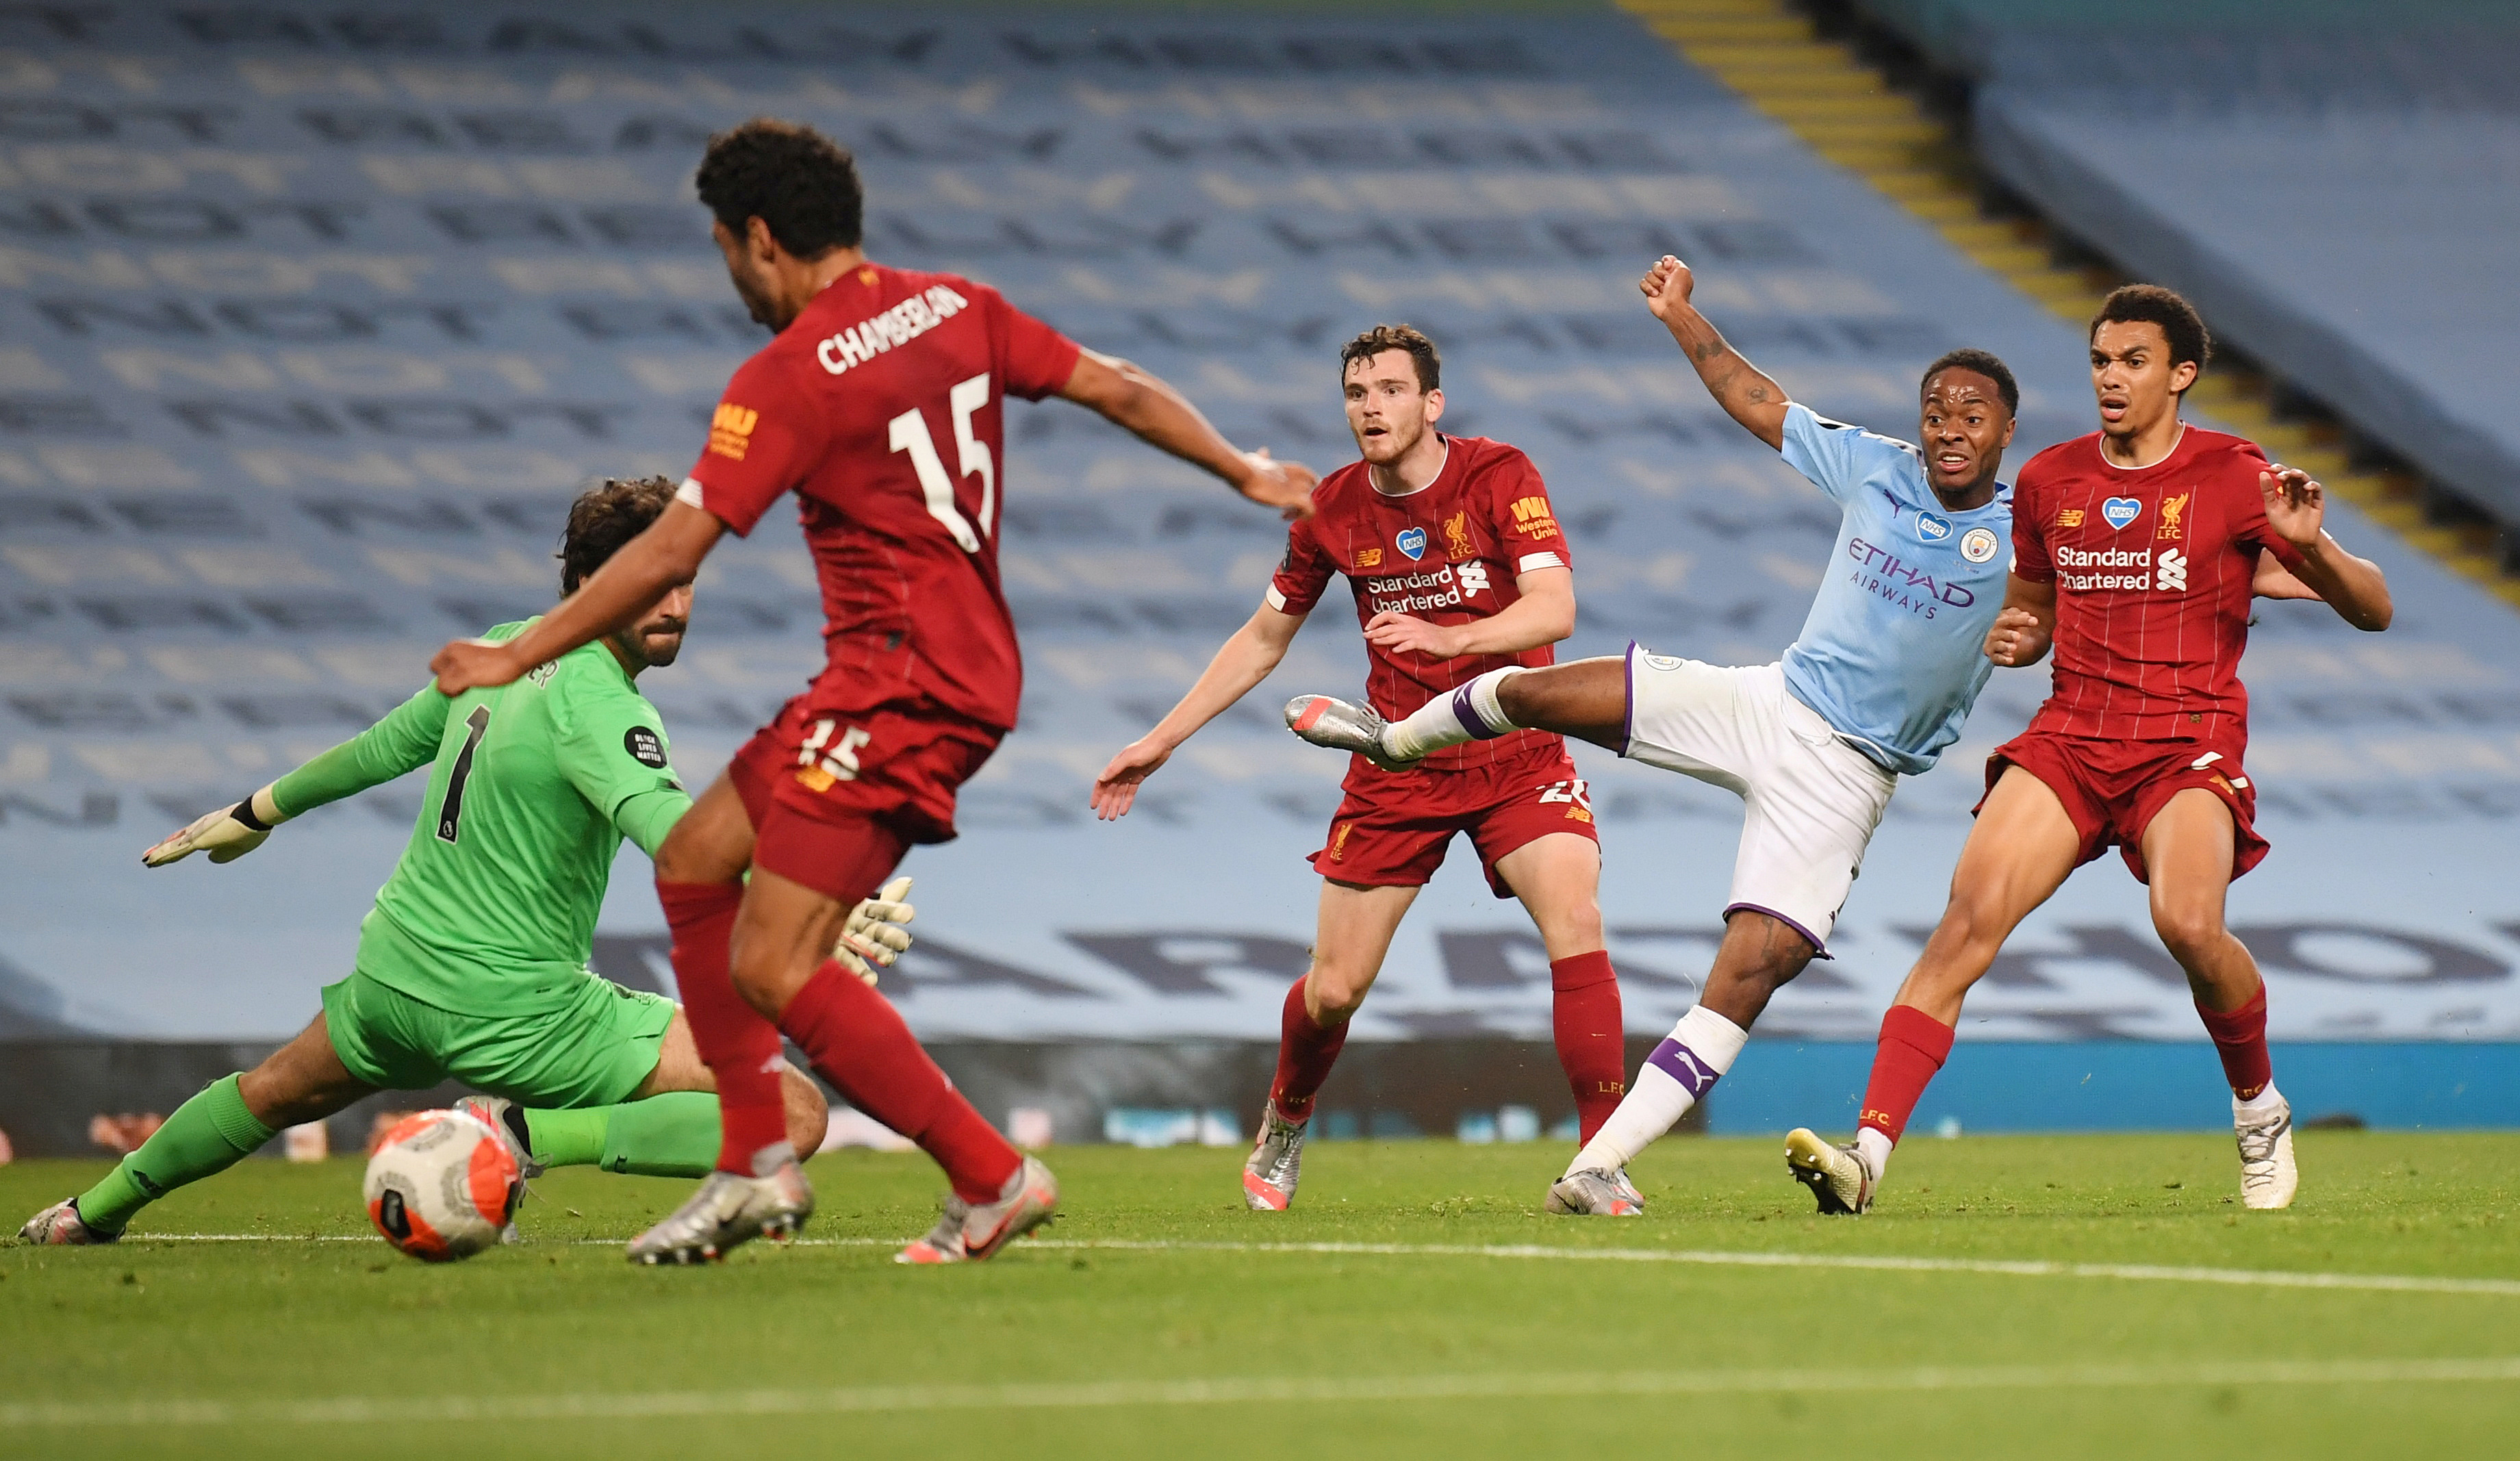 Manchester City's Raheem Sterling scores their fourth goal, as play resumes behind closed doors following the outbreak of the coronavirus disease (COVID-19) during the Premier League match between Manchester City and Liverpool, at Etihad Stadium, in Manchester, Britain, on July 2, 2020. Photo: Laurence Griffiths/Pool via Reuters